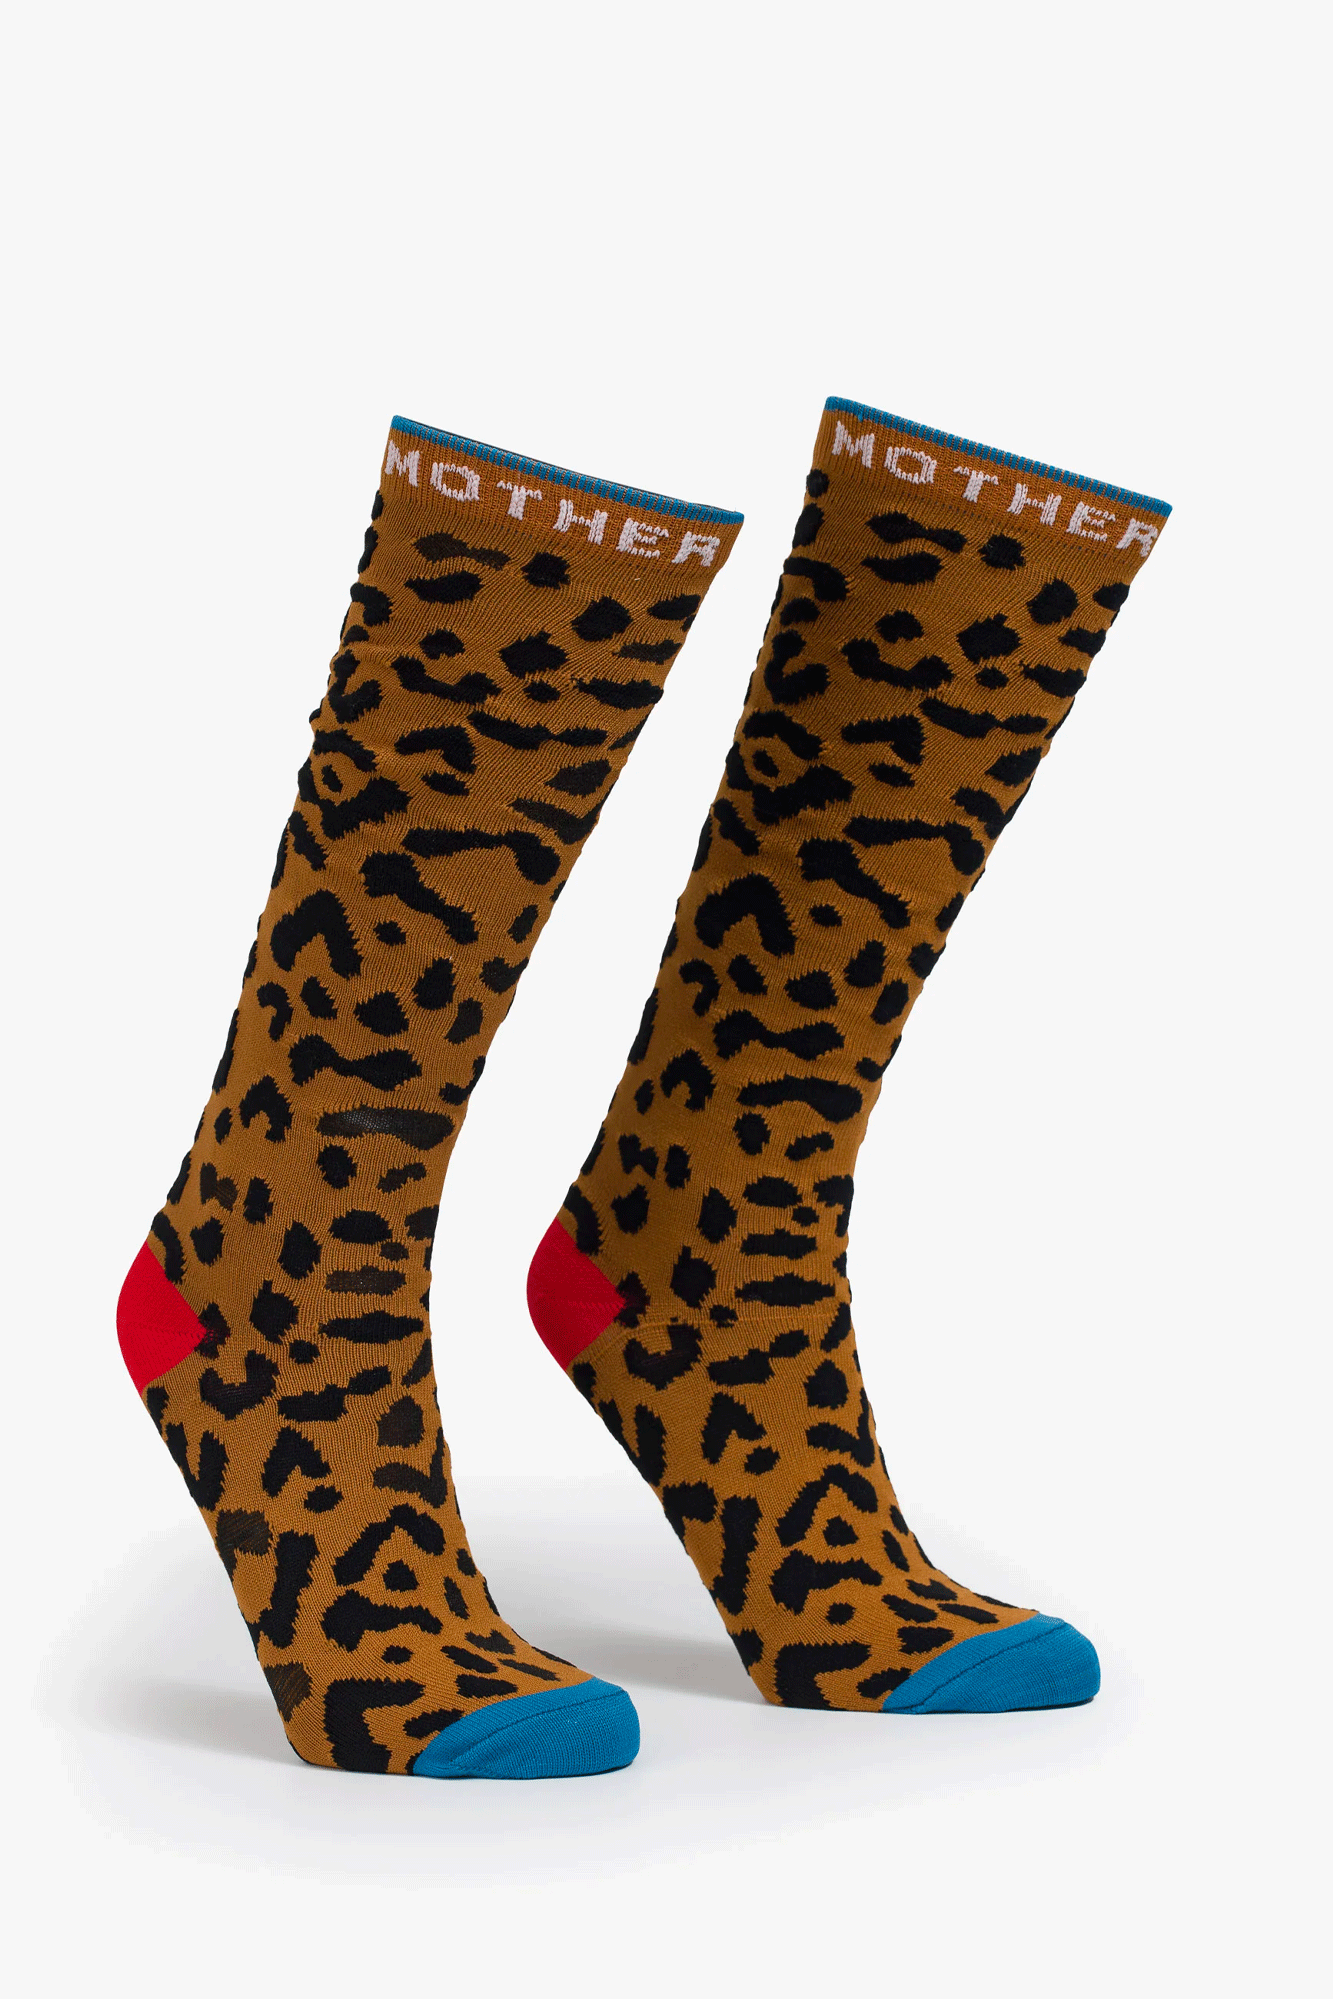 These high performance tube socks from Mother feature a stylish leopard print and bold lettering, adding a unique flair to any wardrobe. Crafted from durable fabrics, they provide maximum comfort, allowing you to take on life's challenges with ease.